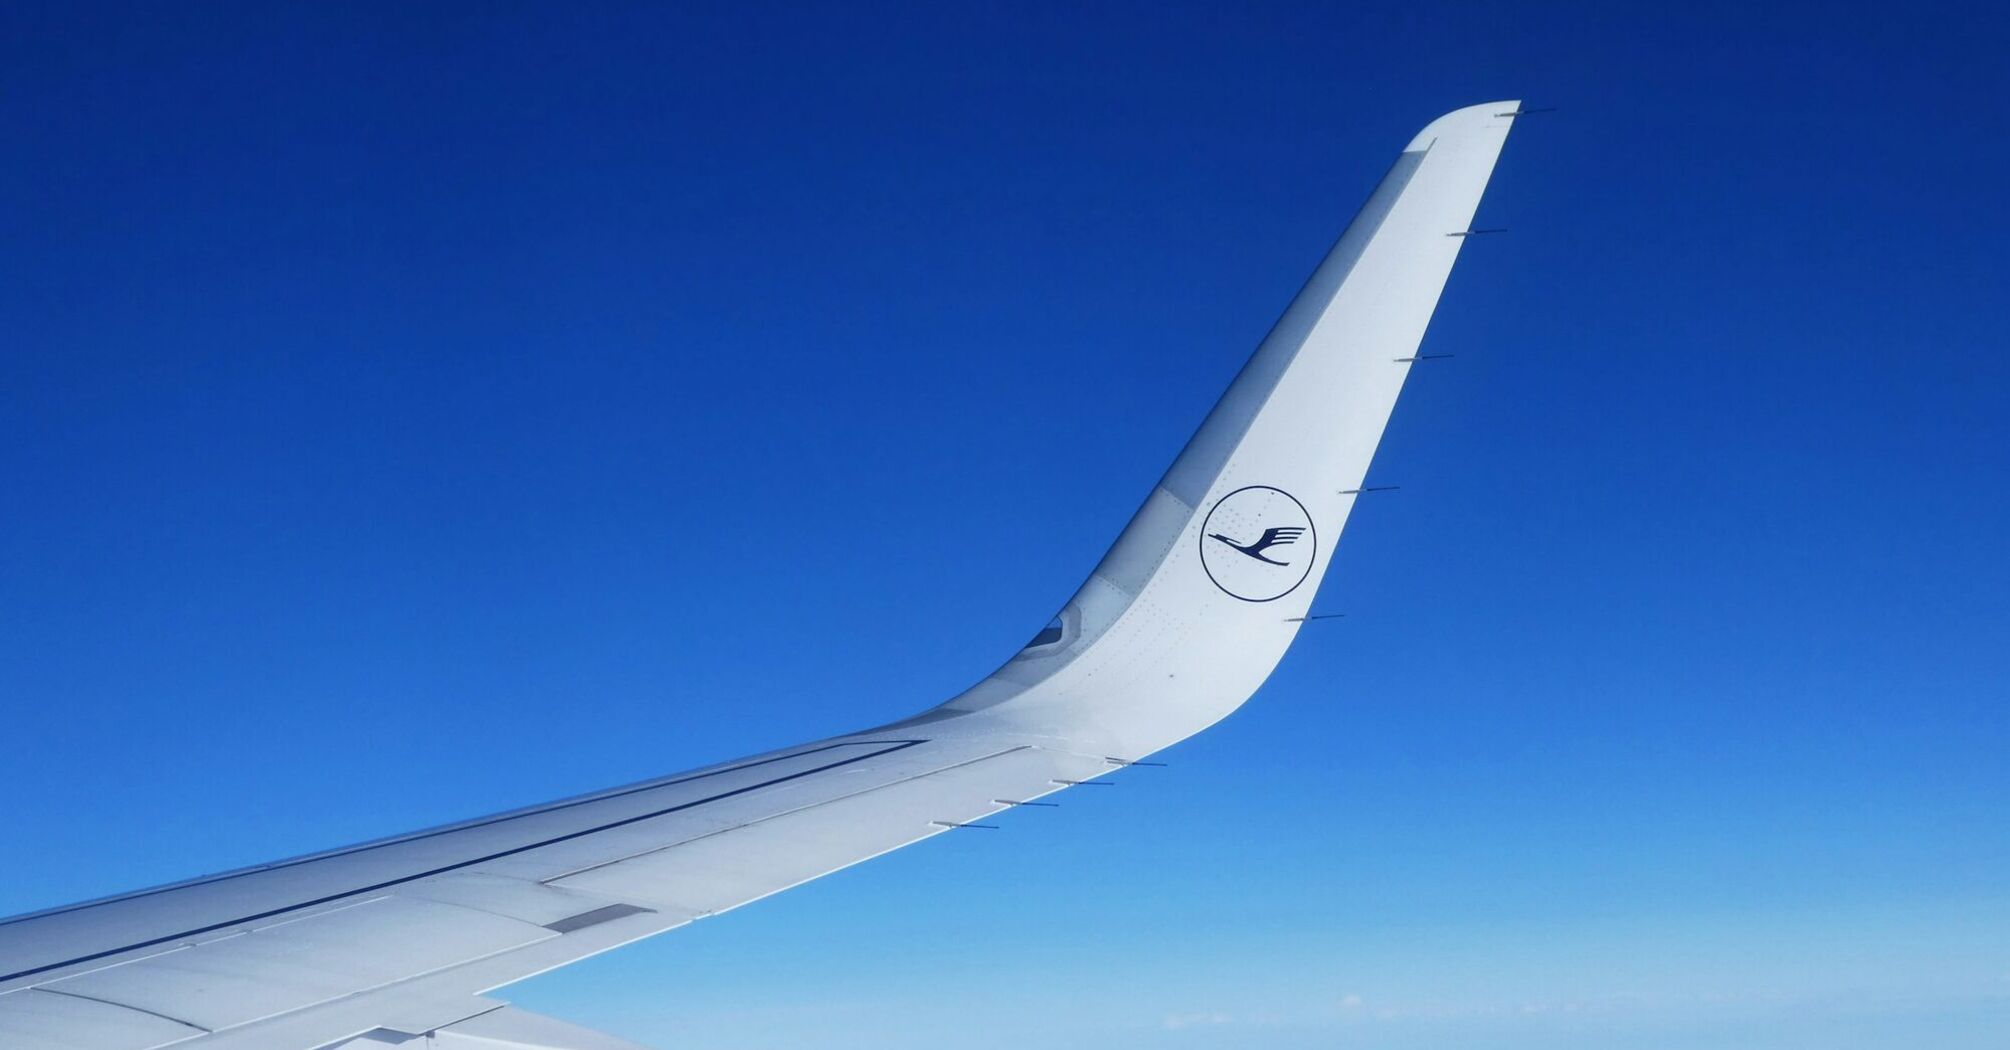 Lufthansa airplane wing during the flight